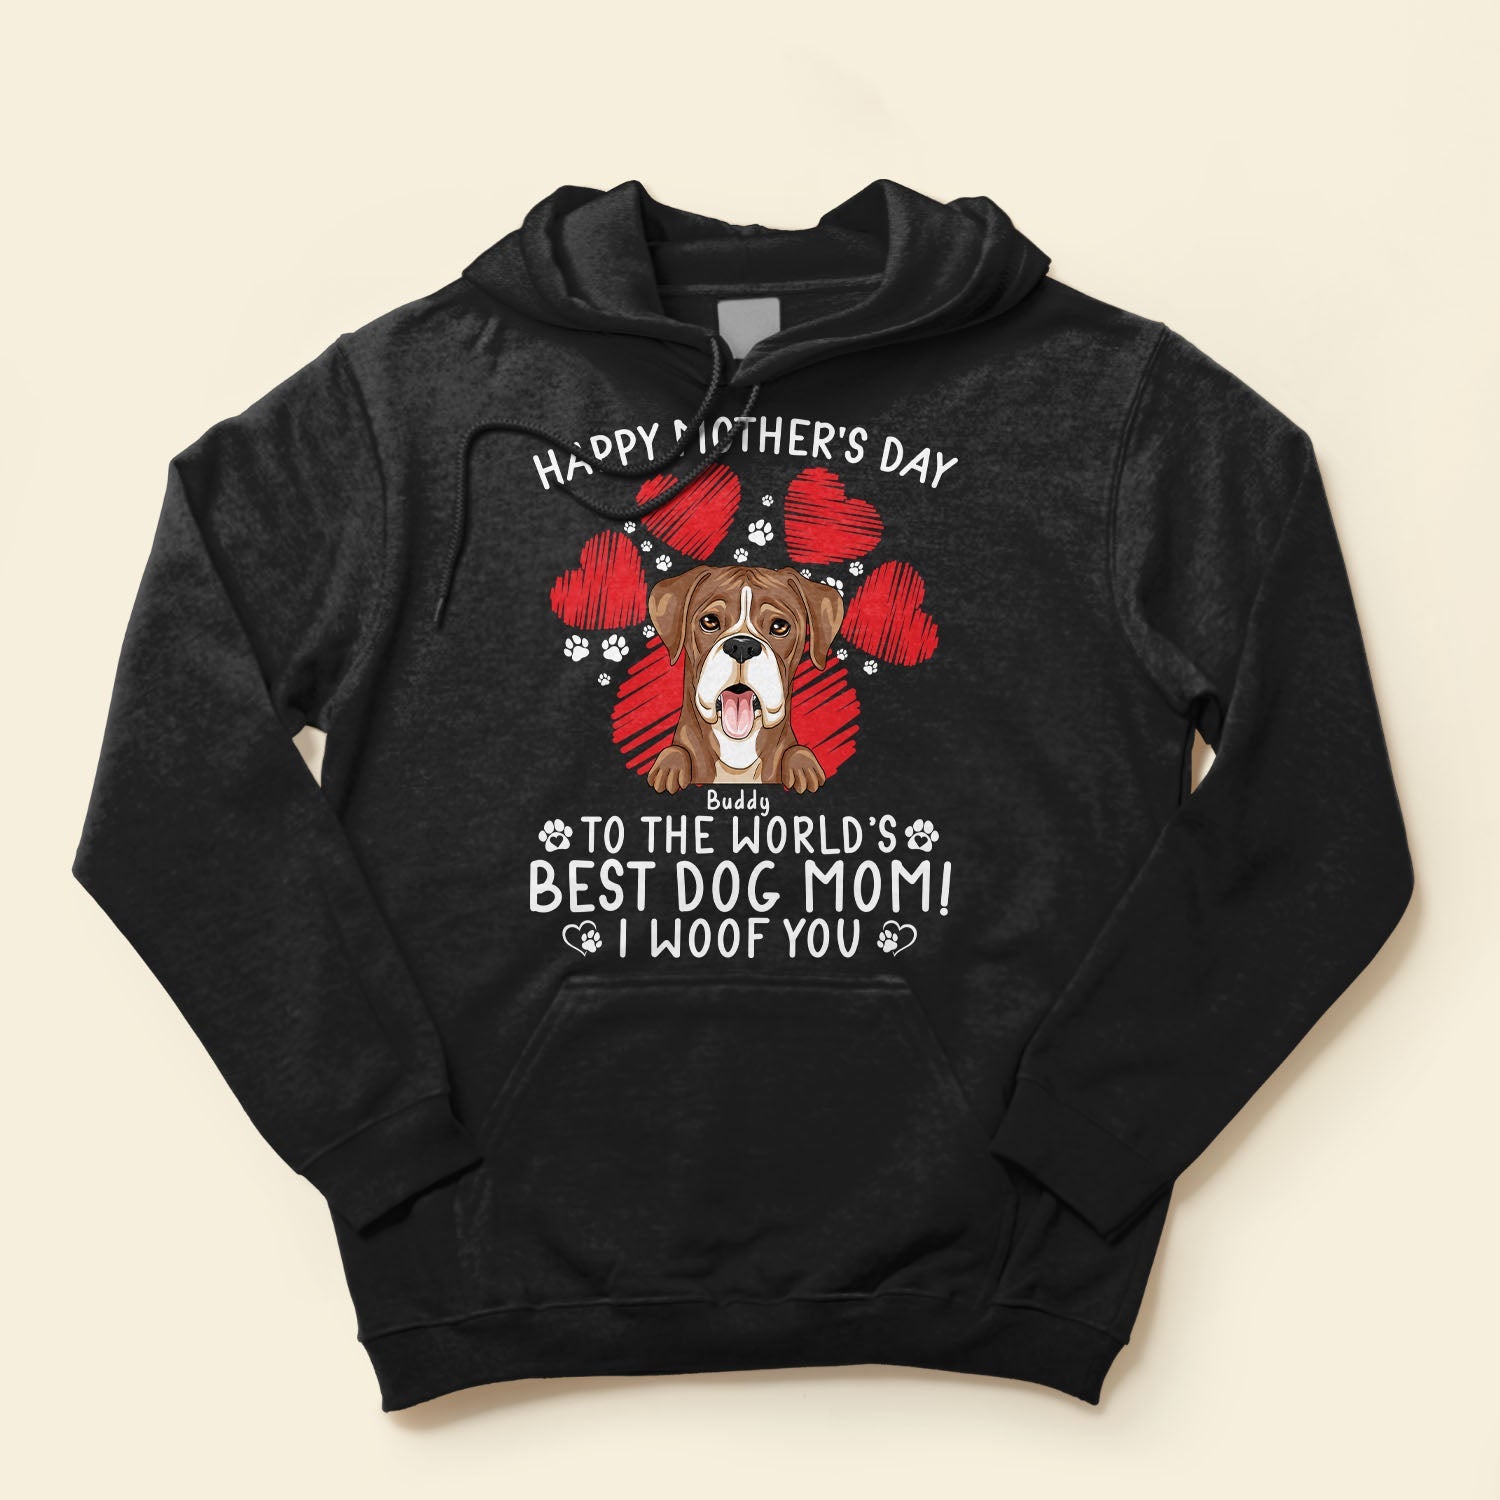 Happy Mother's Day to The World's Best Dog Mom! We Woof You - Gift for Mother's Day, Personalized T-Shirt, Hoodie, Basic Tee / S / Daisy - Pawfect